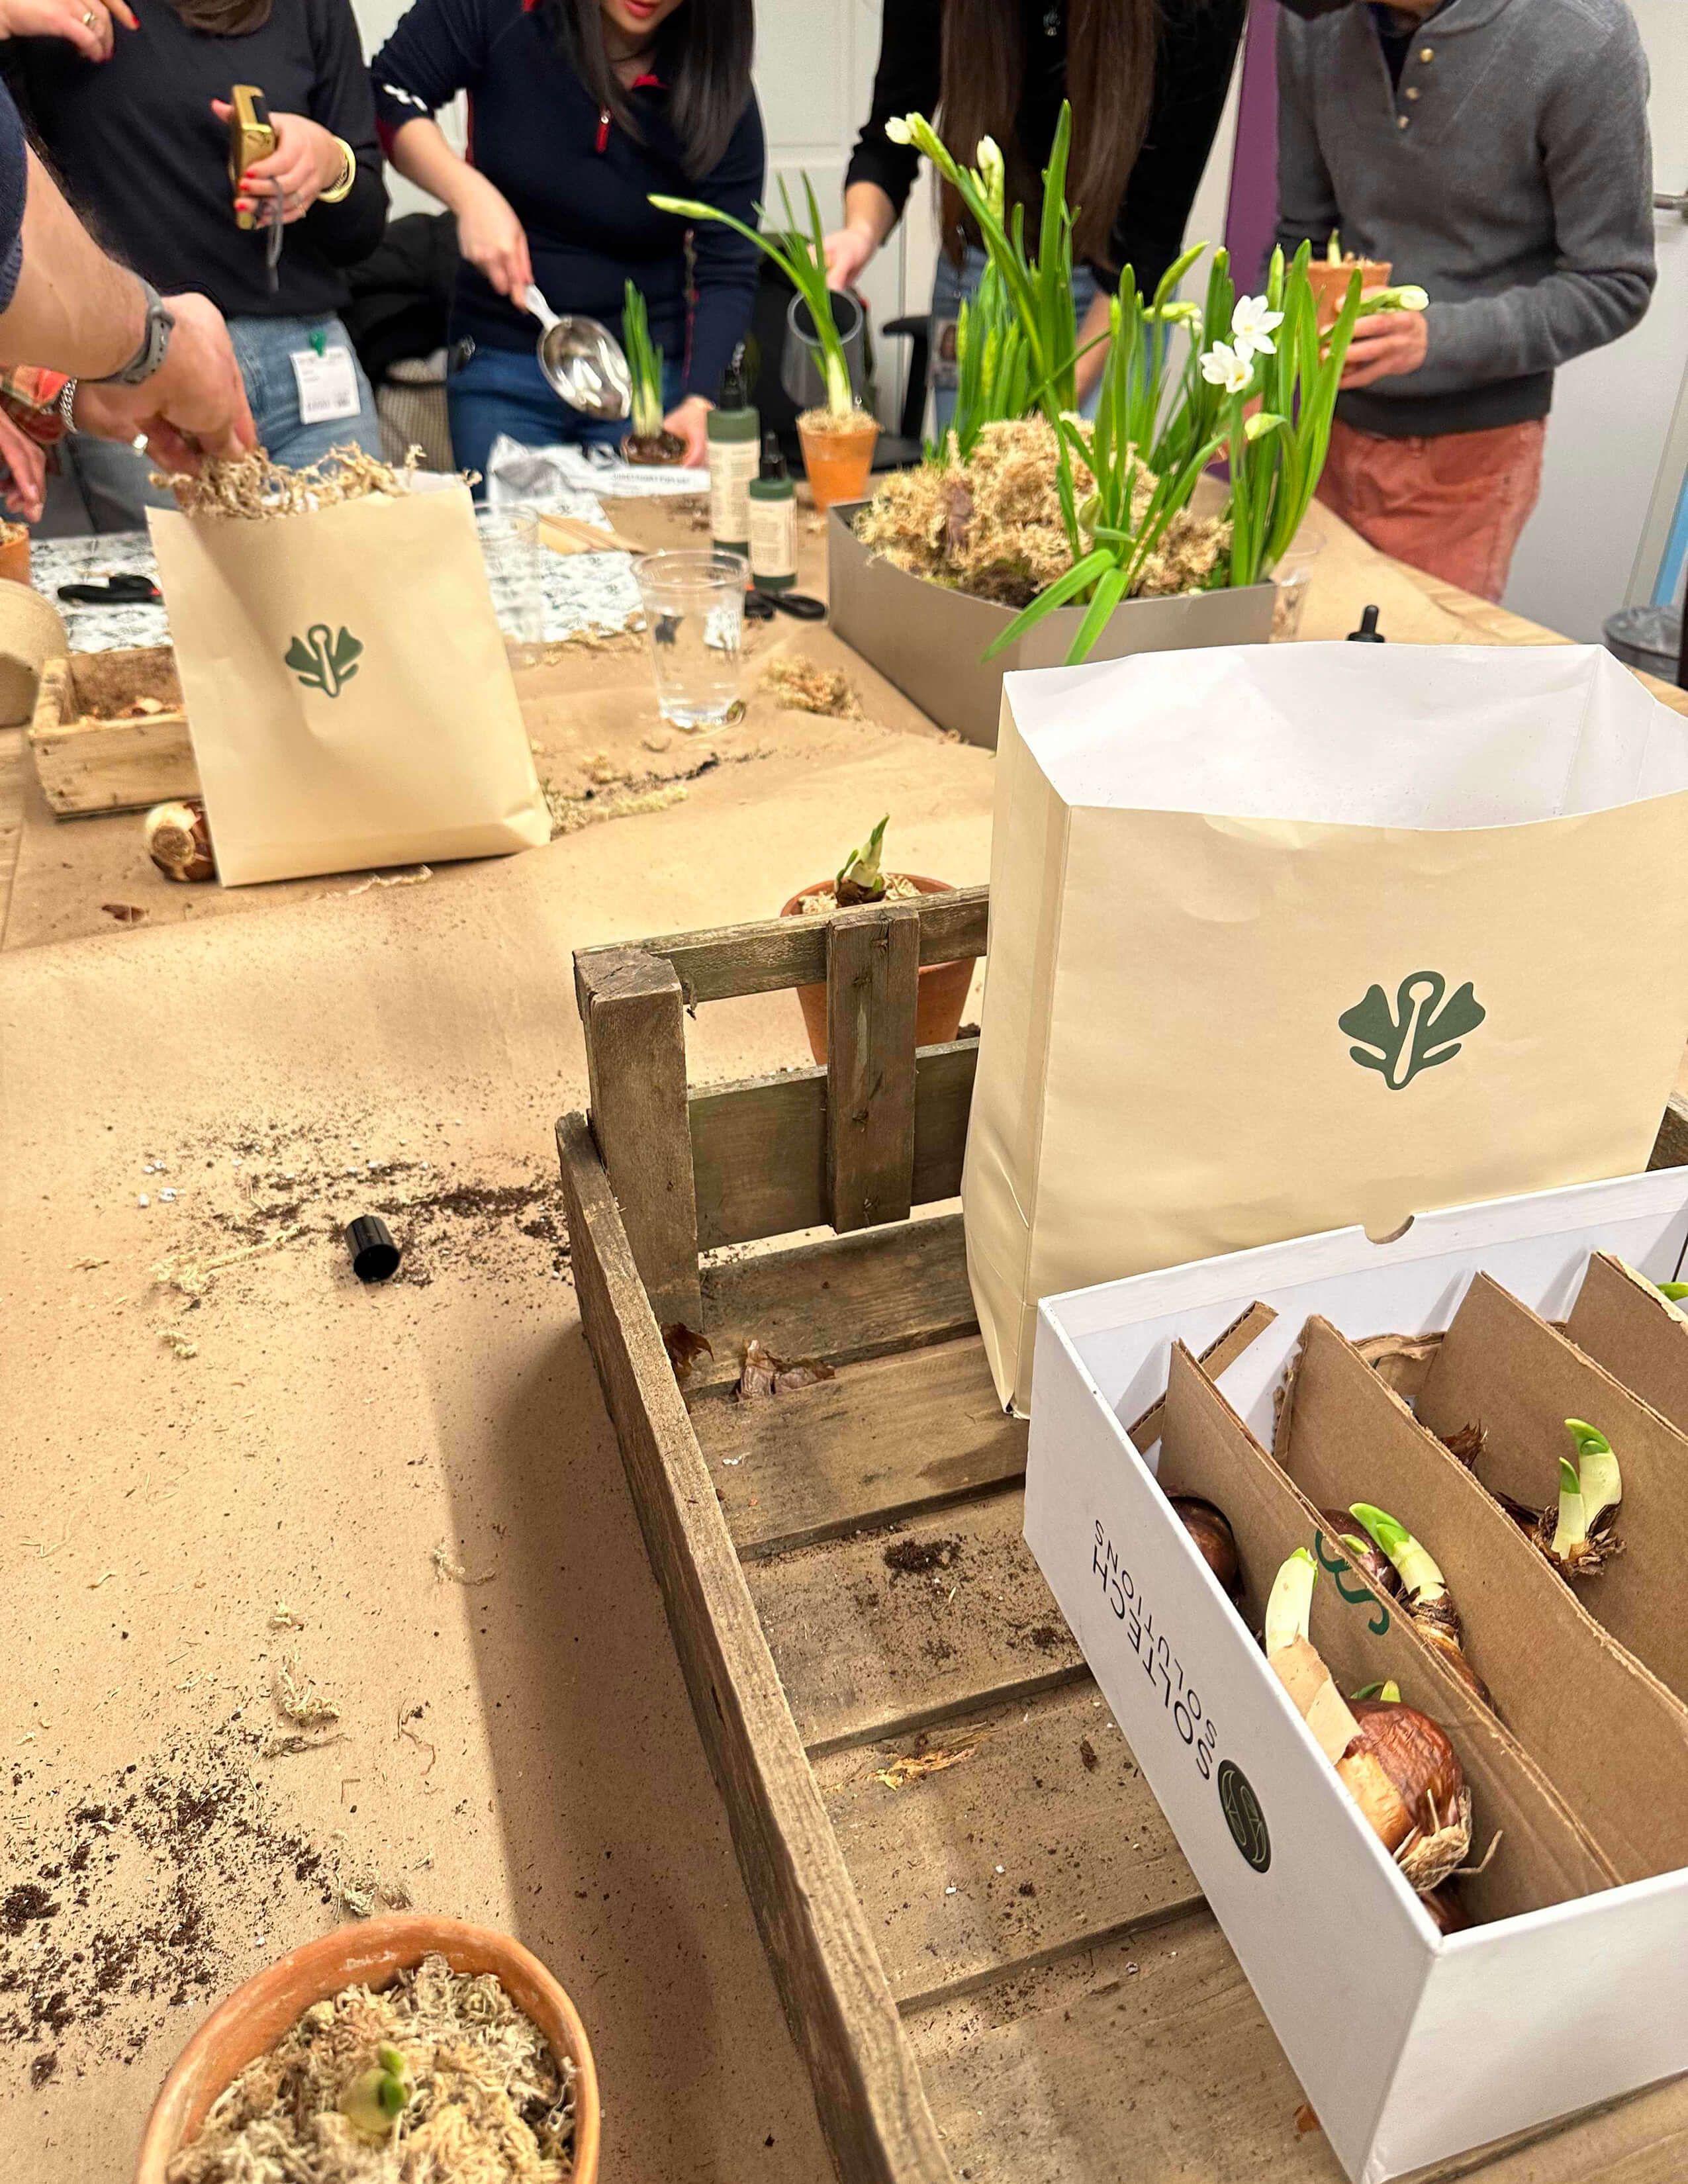 Plant seeds in cardboard boxes inside a wooden box and there are paper bags labelled with Sowvital’s logo on it.